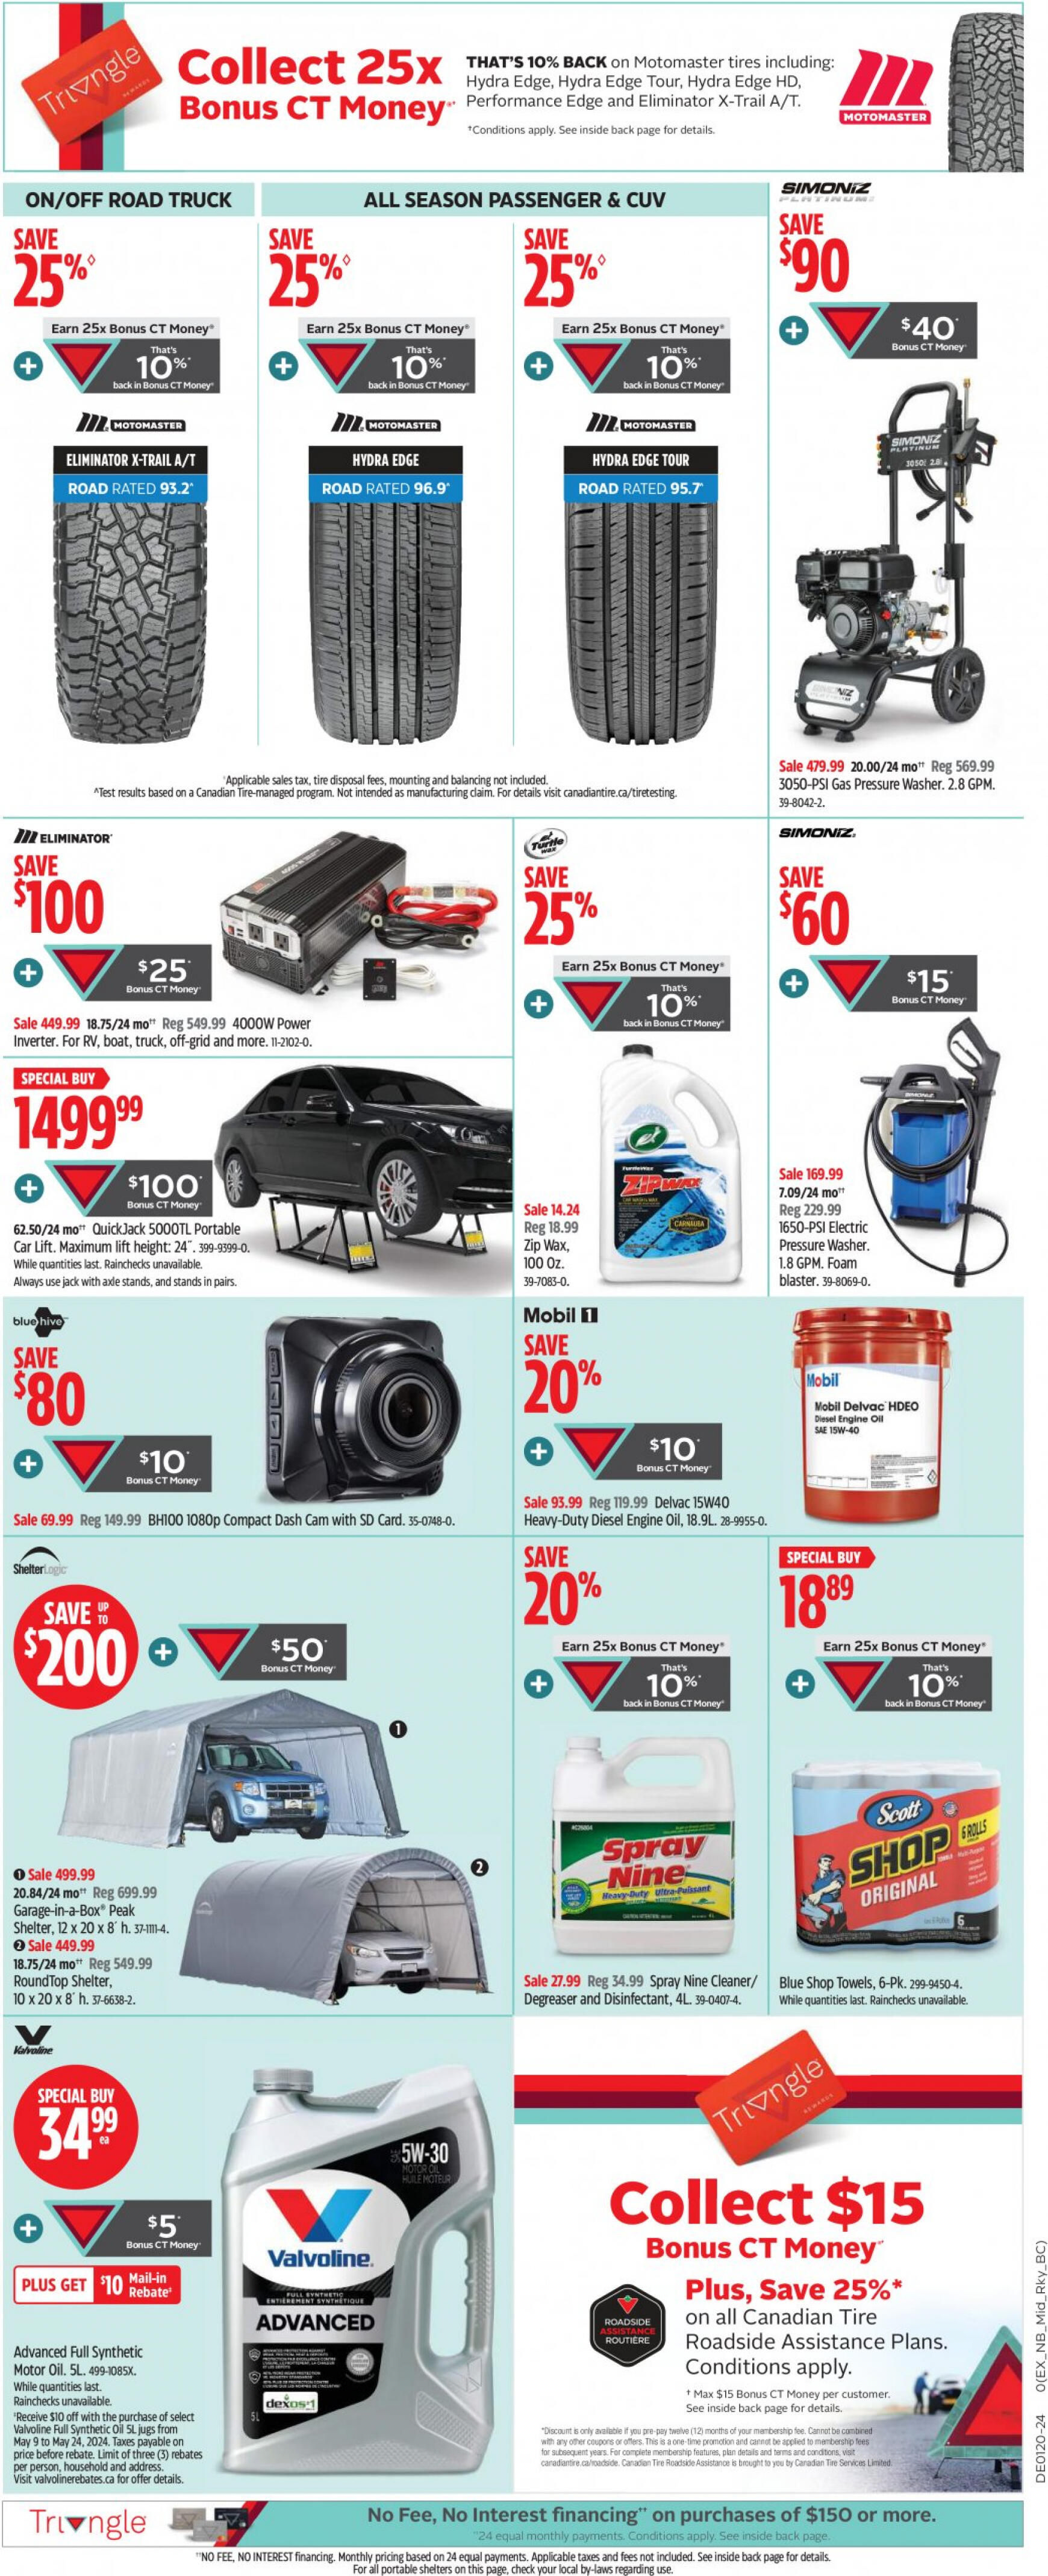 canadian-tire - Canadian Tire flyer current 09.05. - 15.05. - page: 8